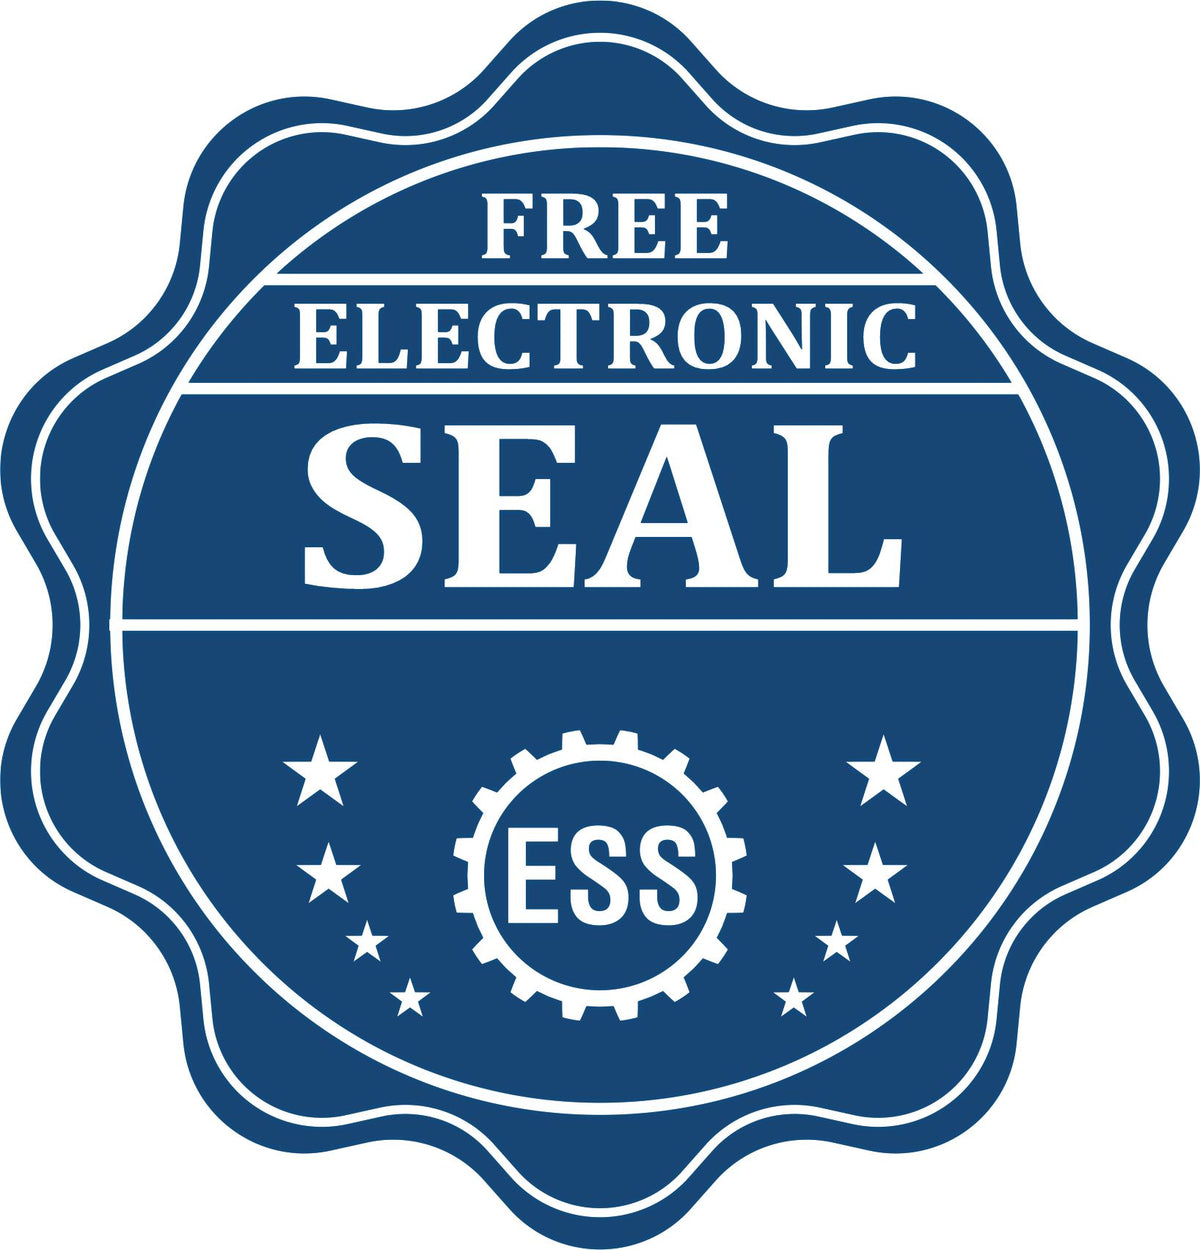 A badge showing a free electronic seal for the Gift North Dakota Architect Seal with stars and the ESS gear on the emblem.